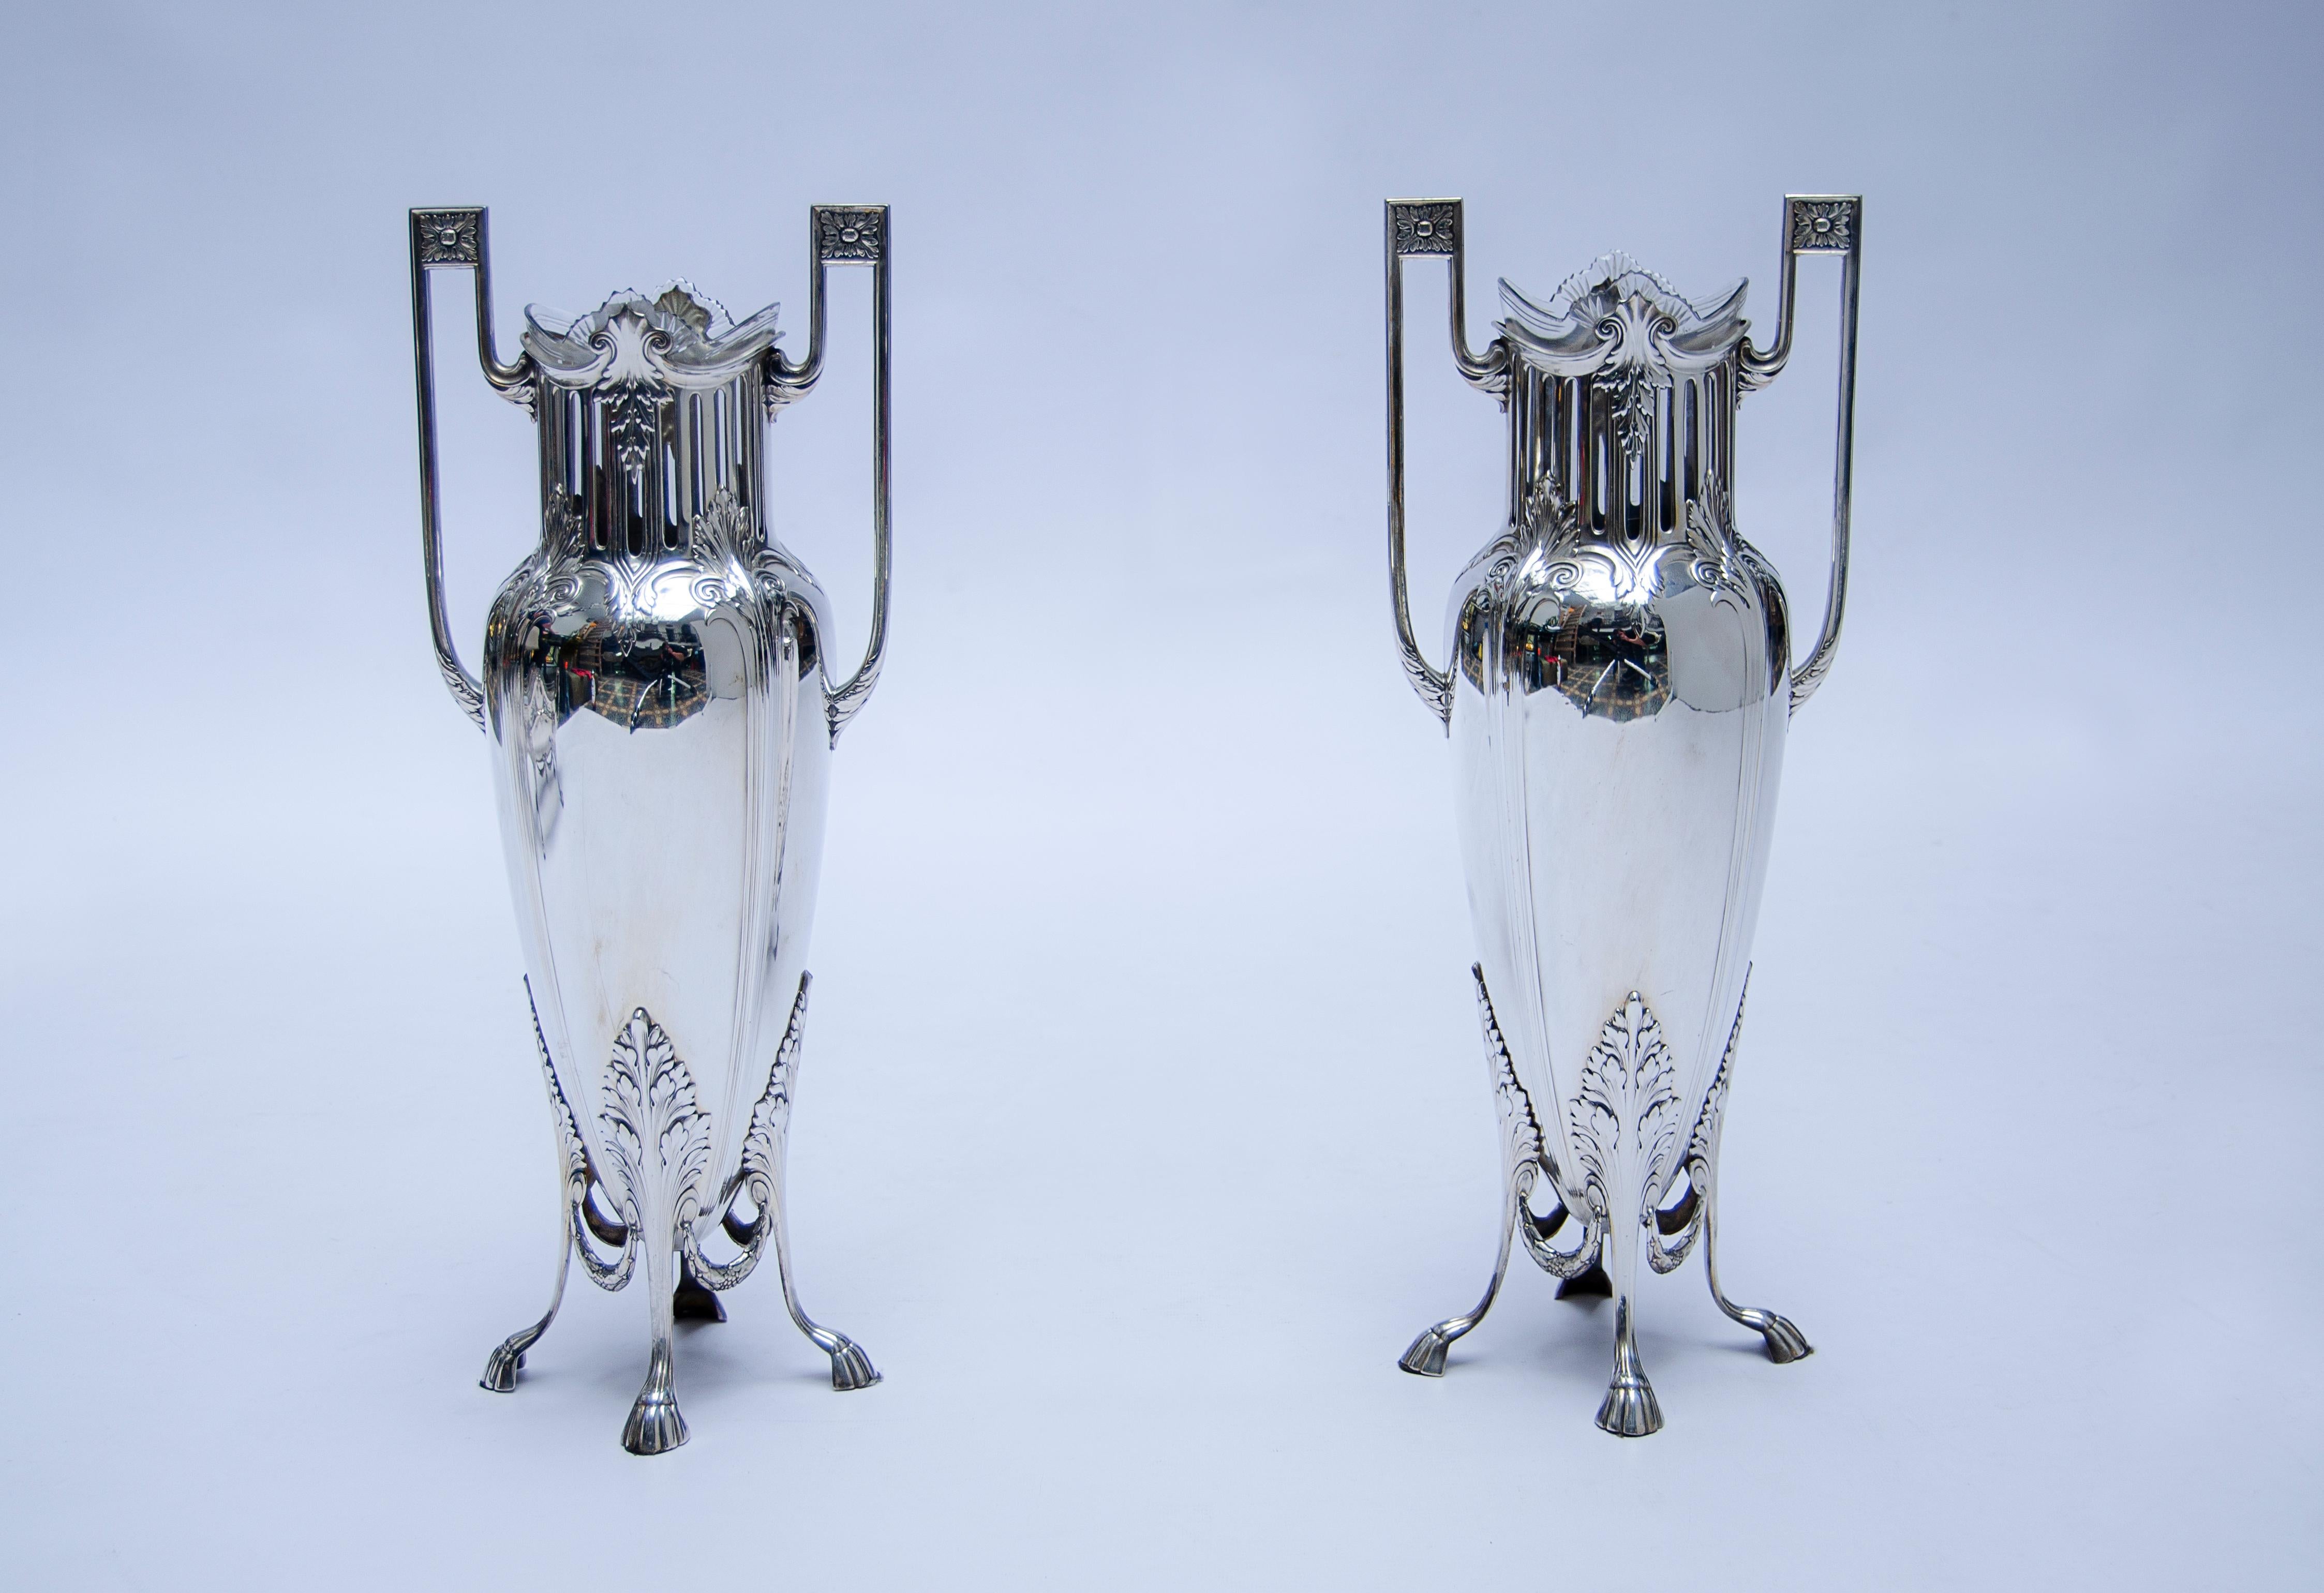 4-piece set consisting of two vases and a centerpiece for flowers, made of silver-plated bronze with cut glass, manufactured by WMF-Württembergische Metallwarenfabrik (1853 to the present). WMF signature.

Germany, CIRCA 1900.